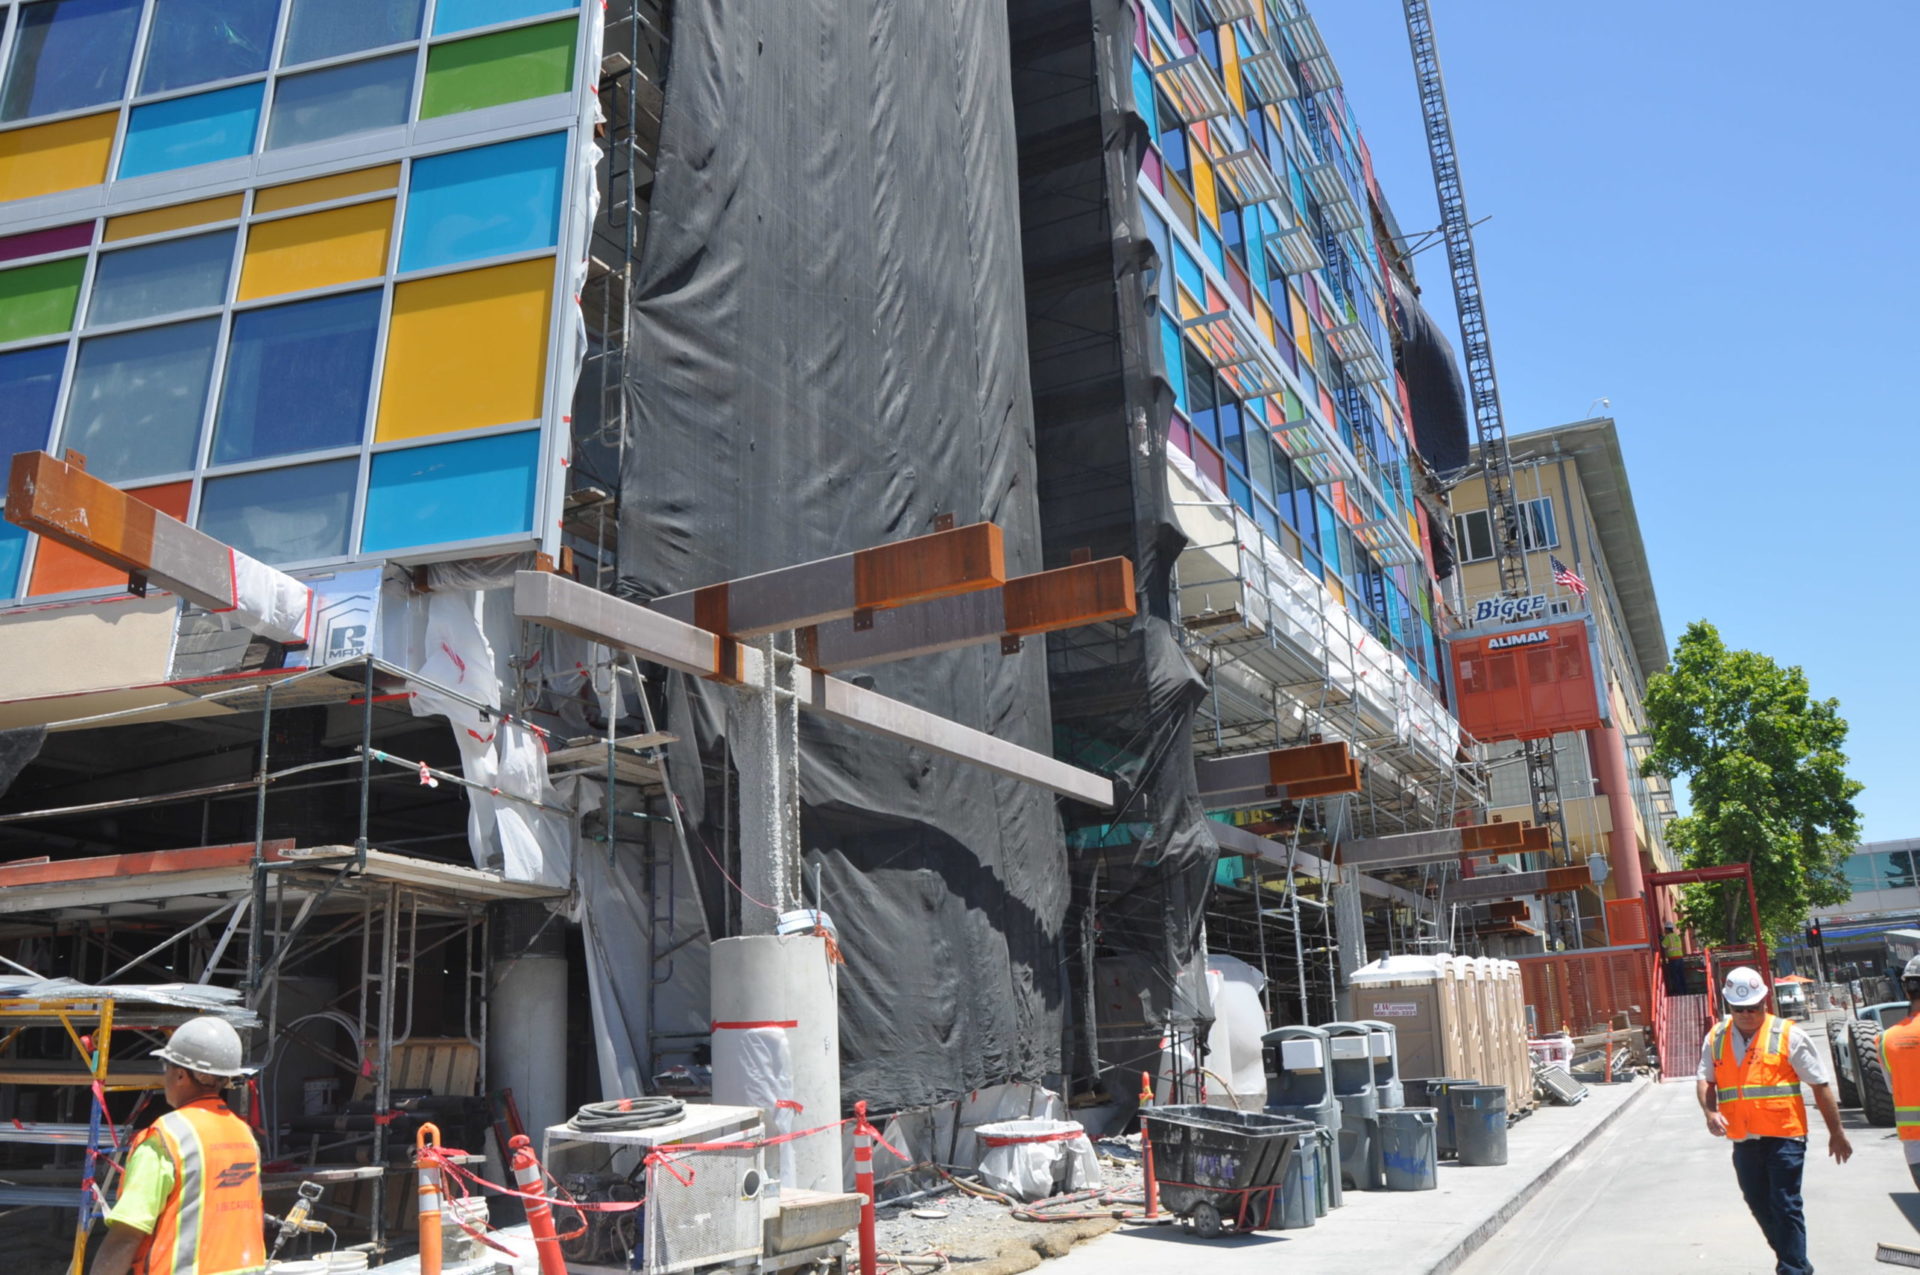 Image from the Gallery: UCSF Benioff Children’s Hospital – Oakland, CA